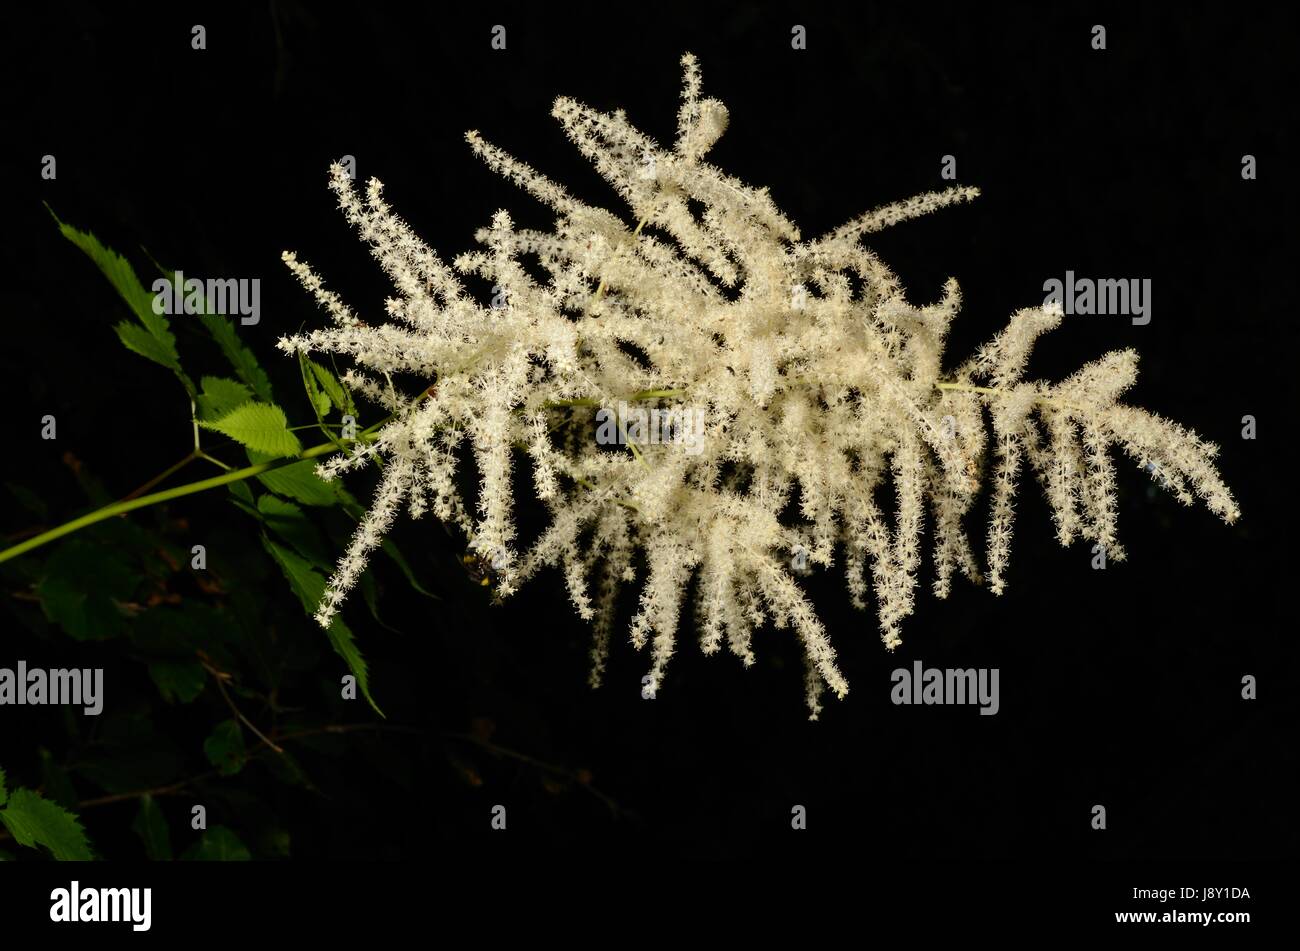 Aruncus dioicus, or Bride's Feathers, flowering in a European montane forest. The plant is also called Goat's Beard. Stock Photo